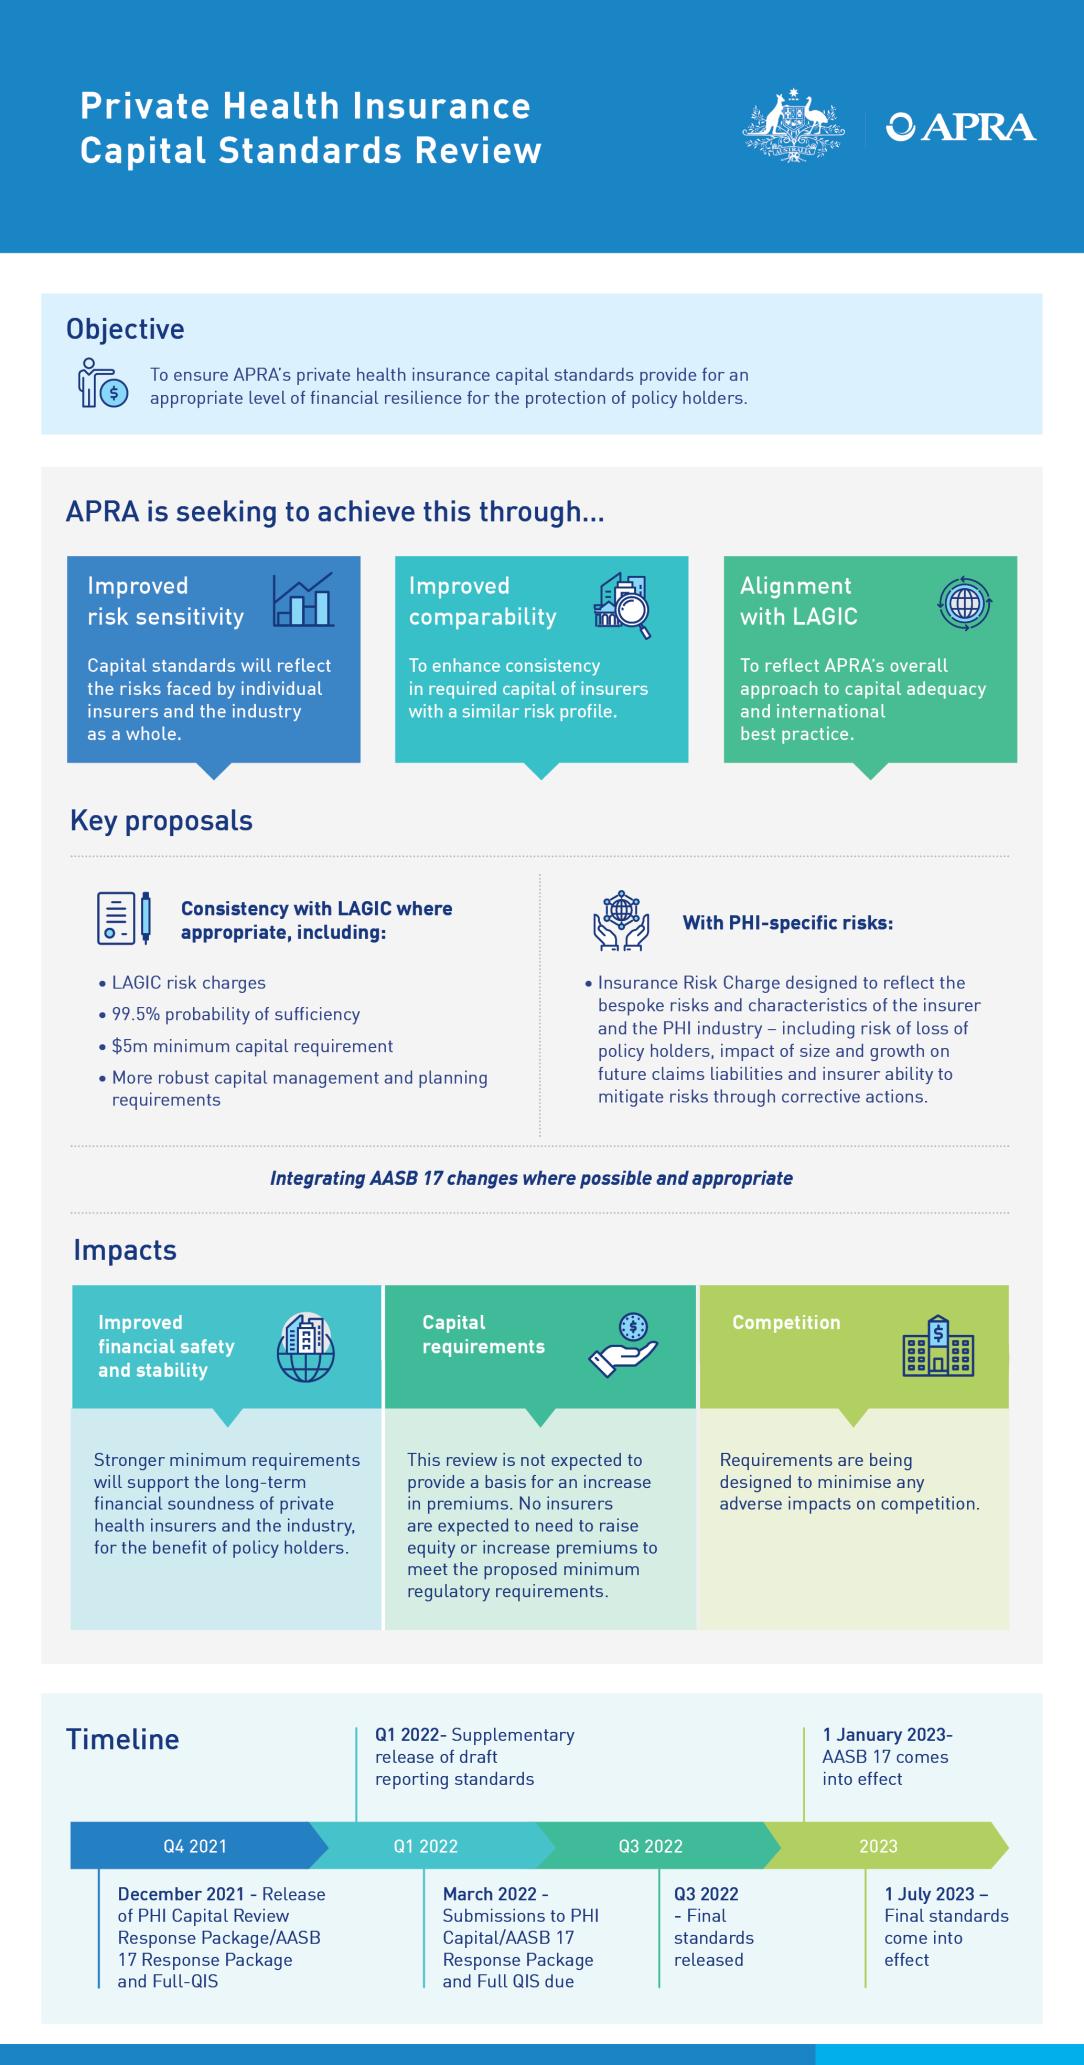 An accessible version of this infographic is available at https://www.apra.gov.au/review-of-private-health-insurance-capital-framework-infographic-accessible-version